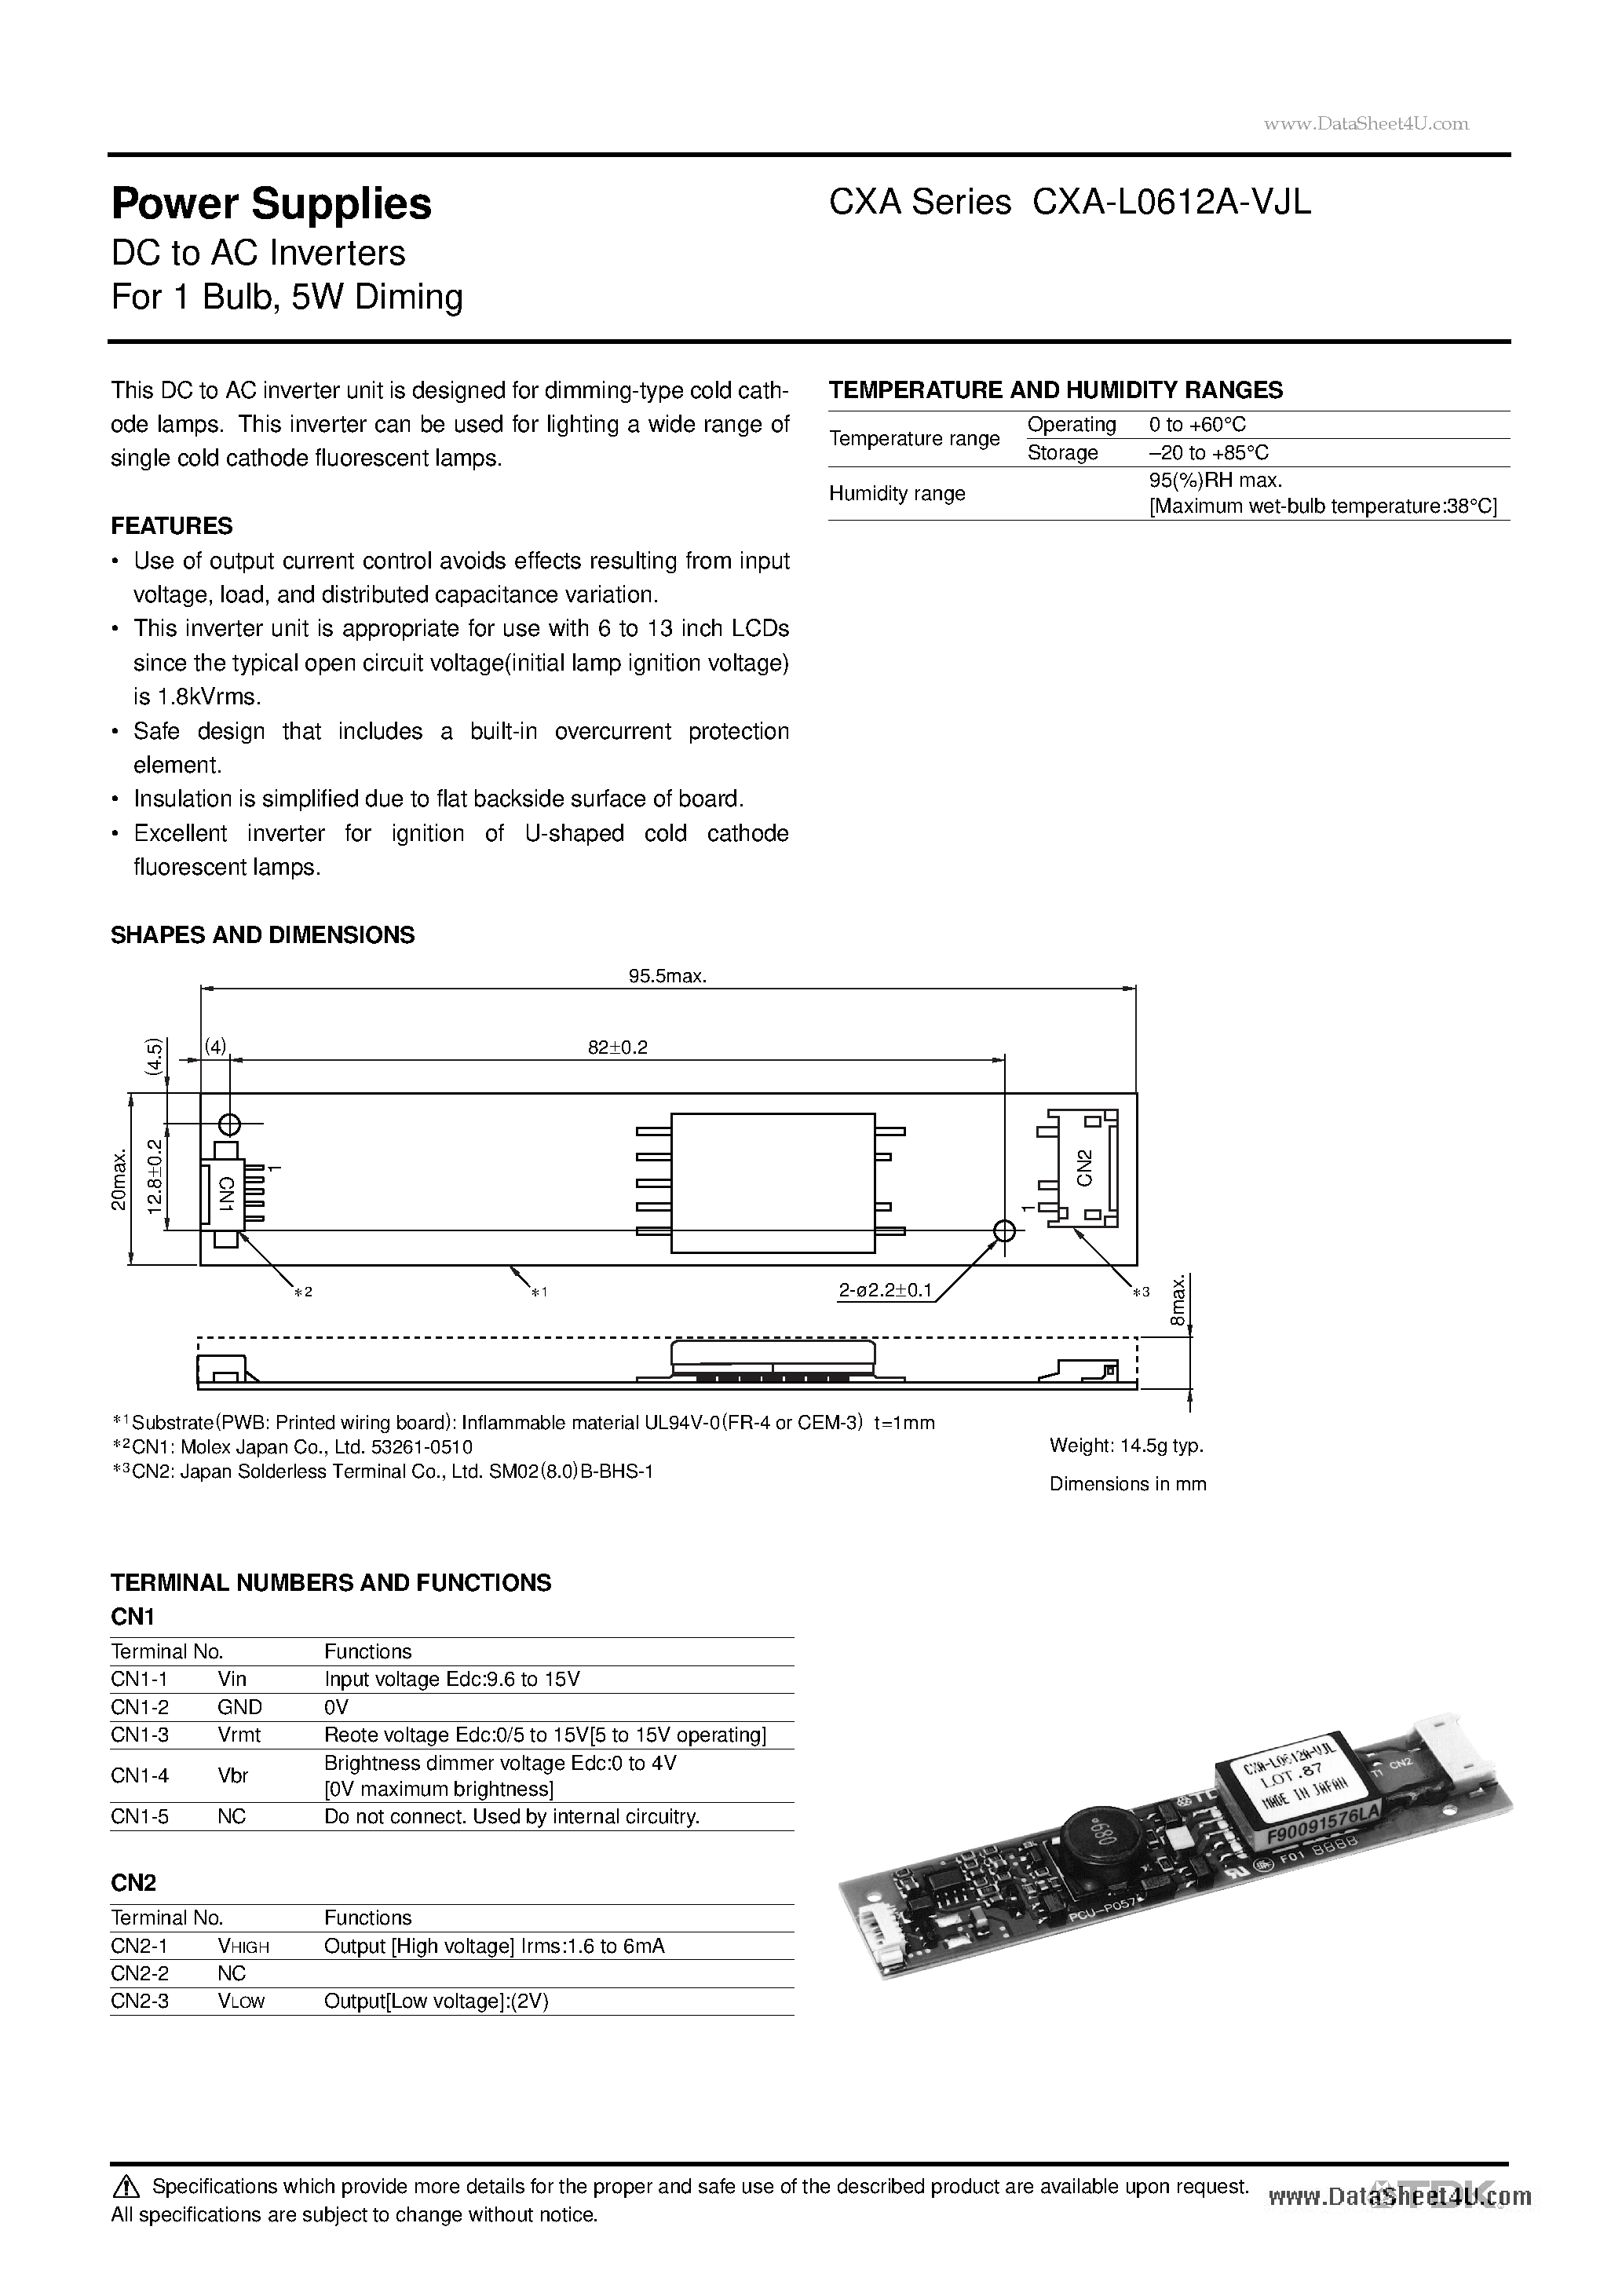 Datasheet CXA-L0612A-VJL - Power Supplies DC to AC Inverters page 1